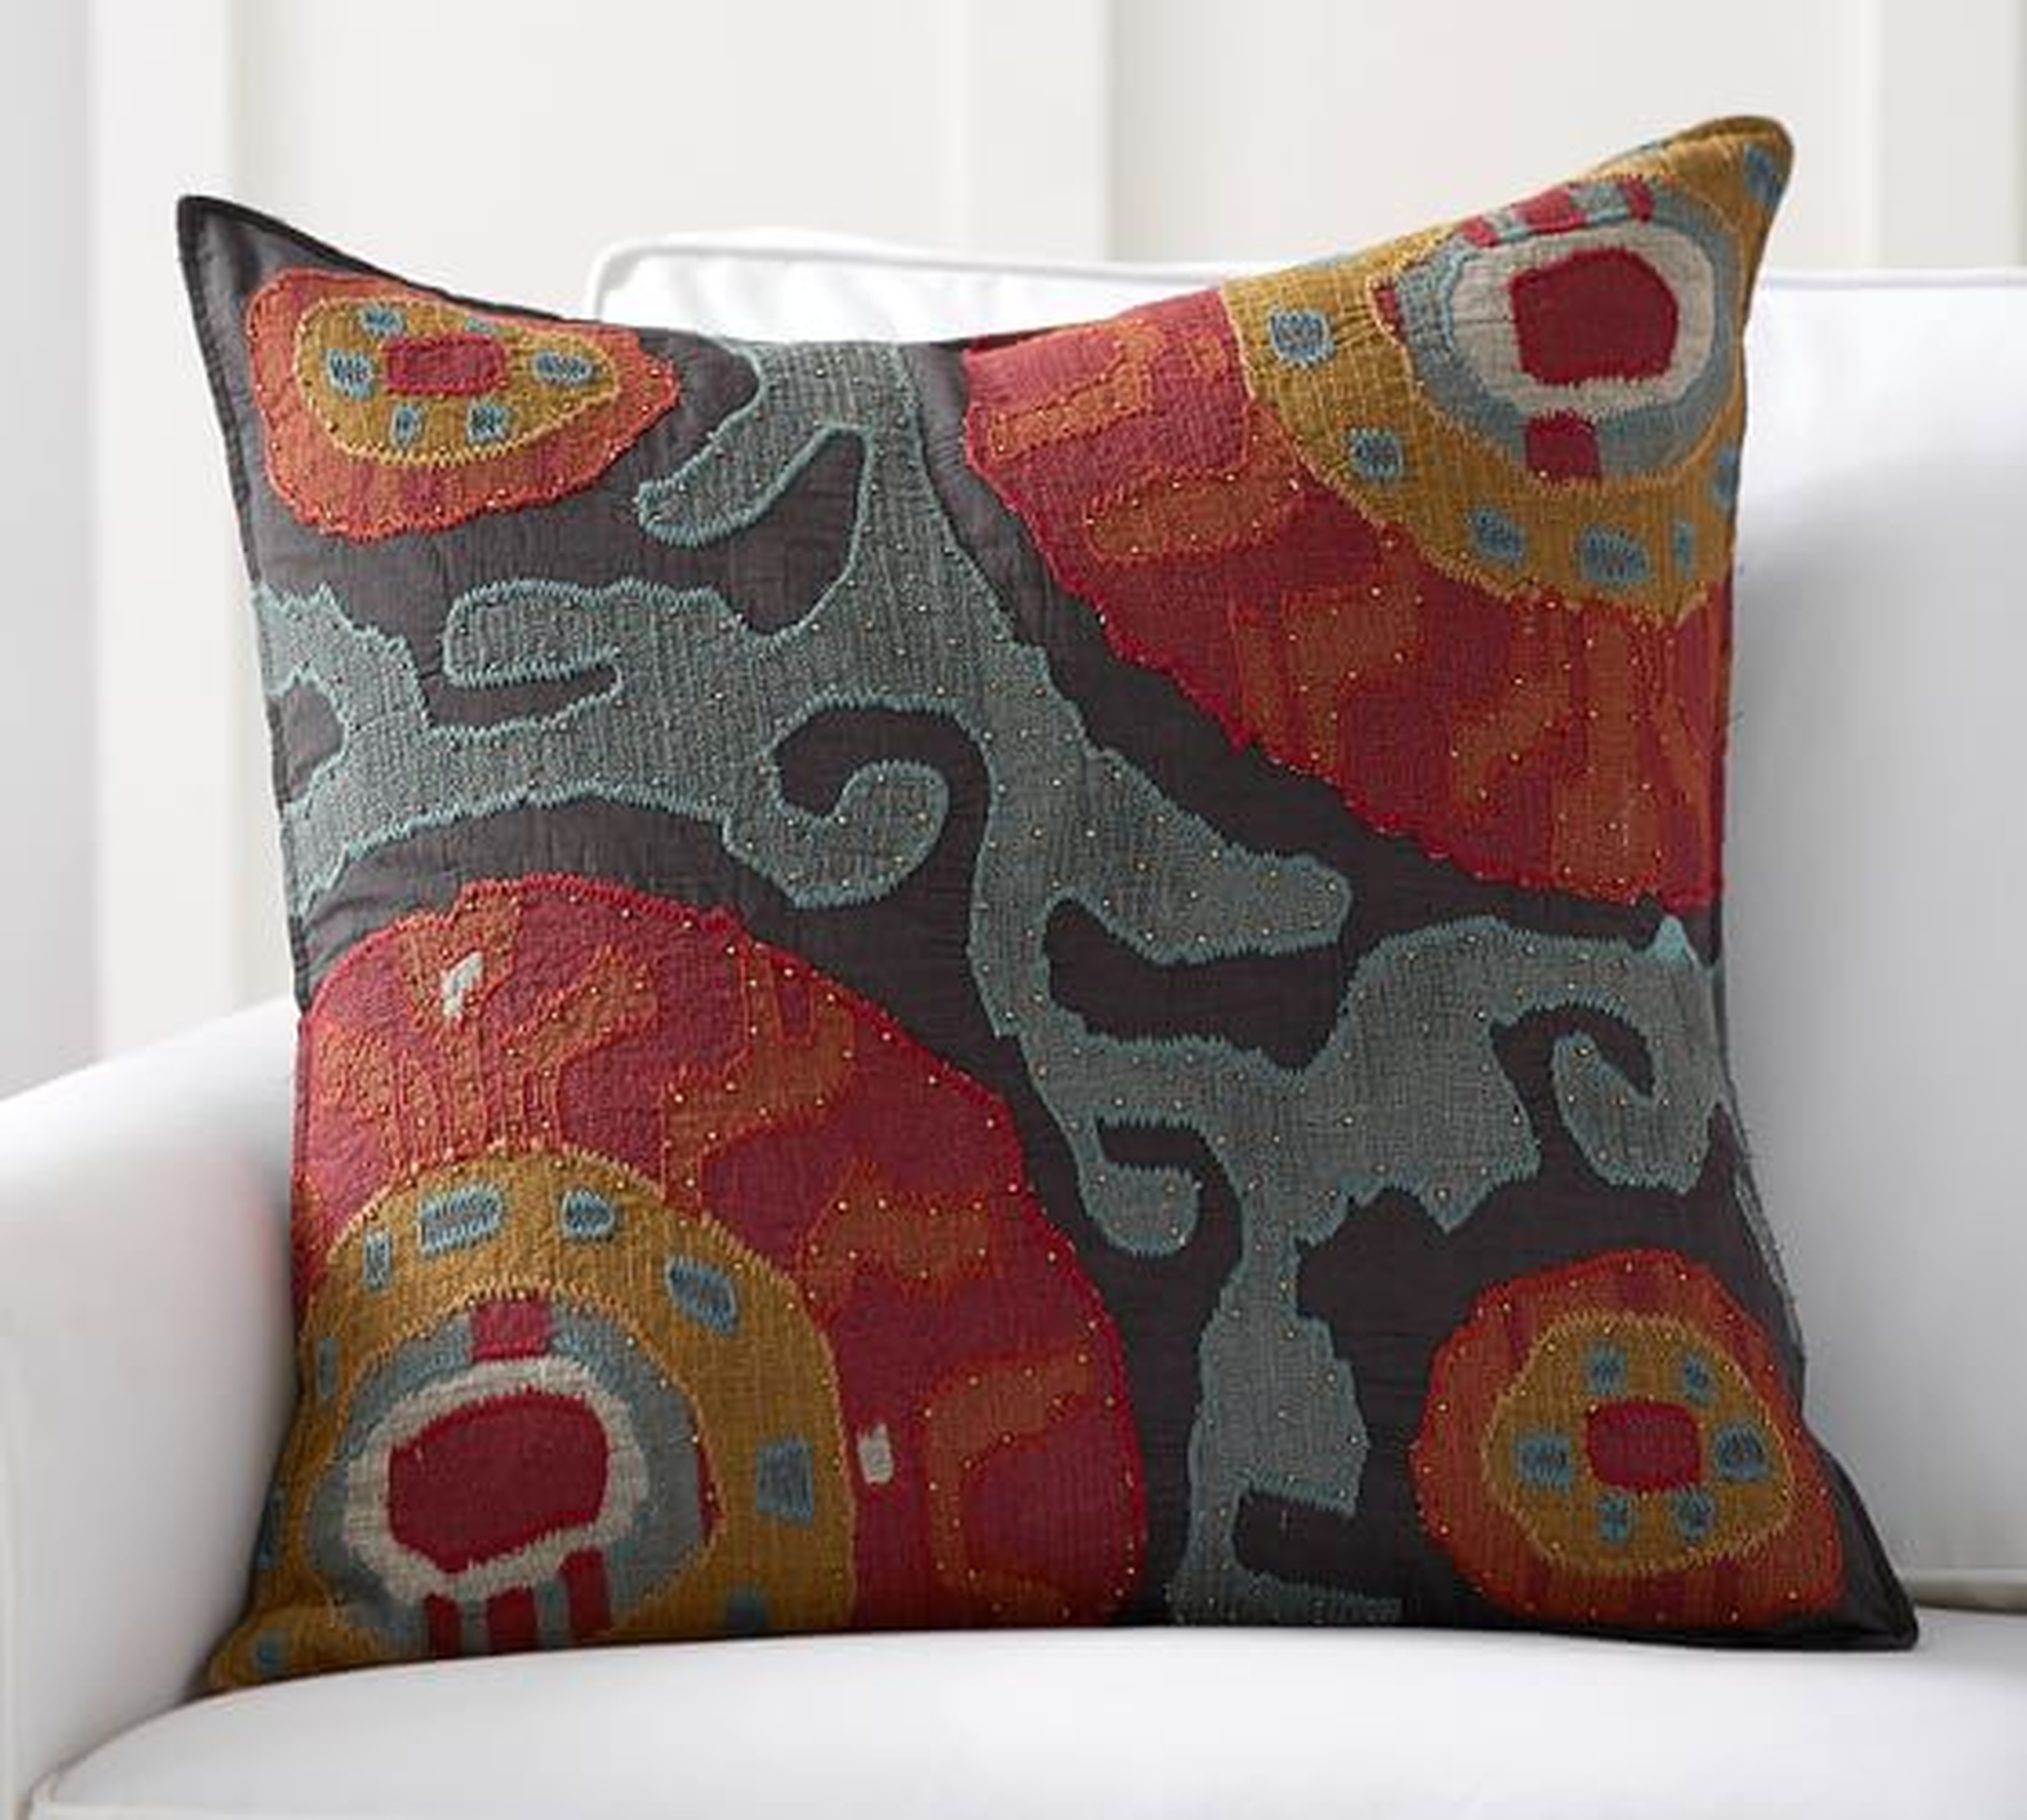 Houston Cropped Suzani Pillow Cover - Insert sold separately - Pottery Barn